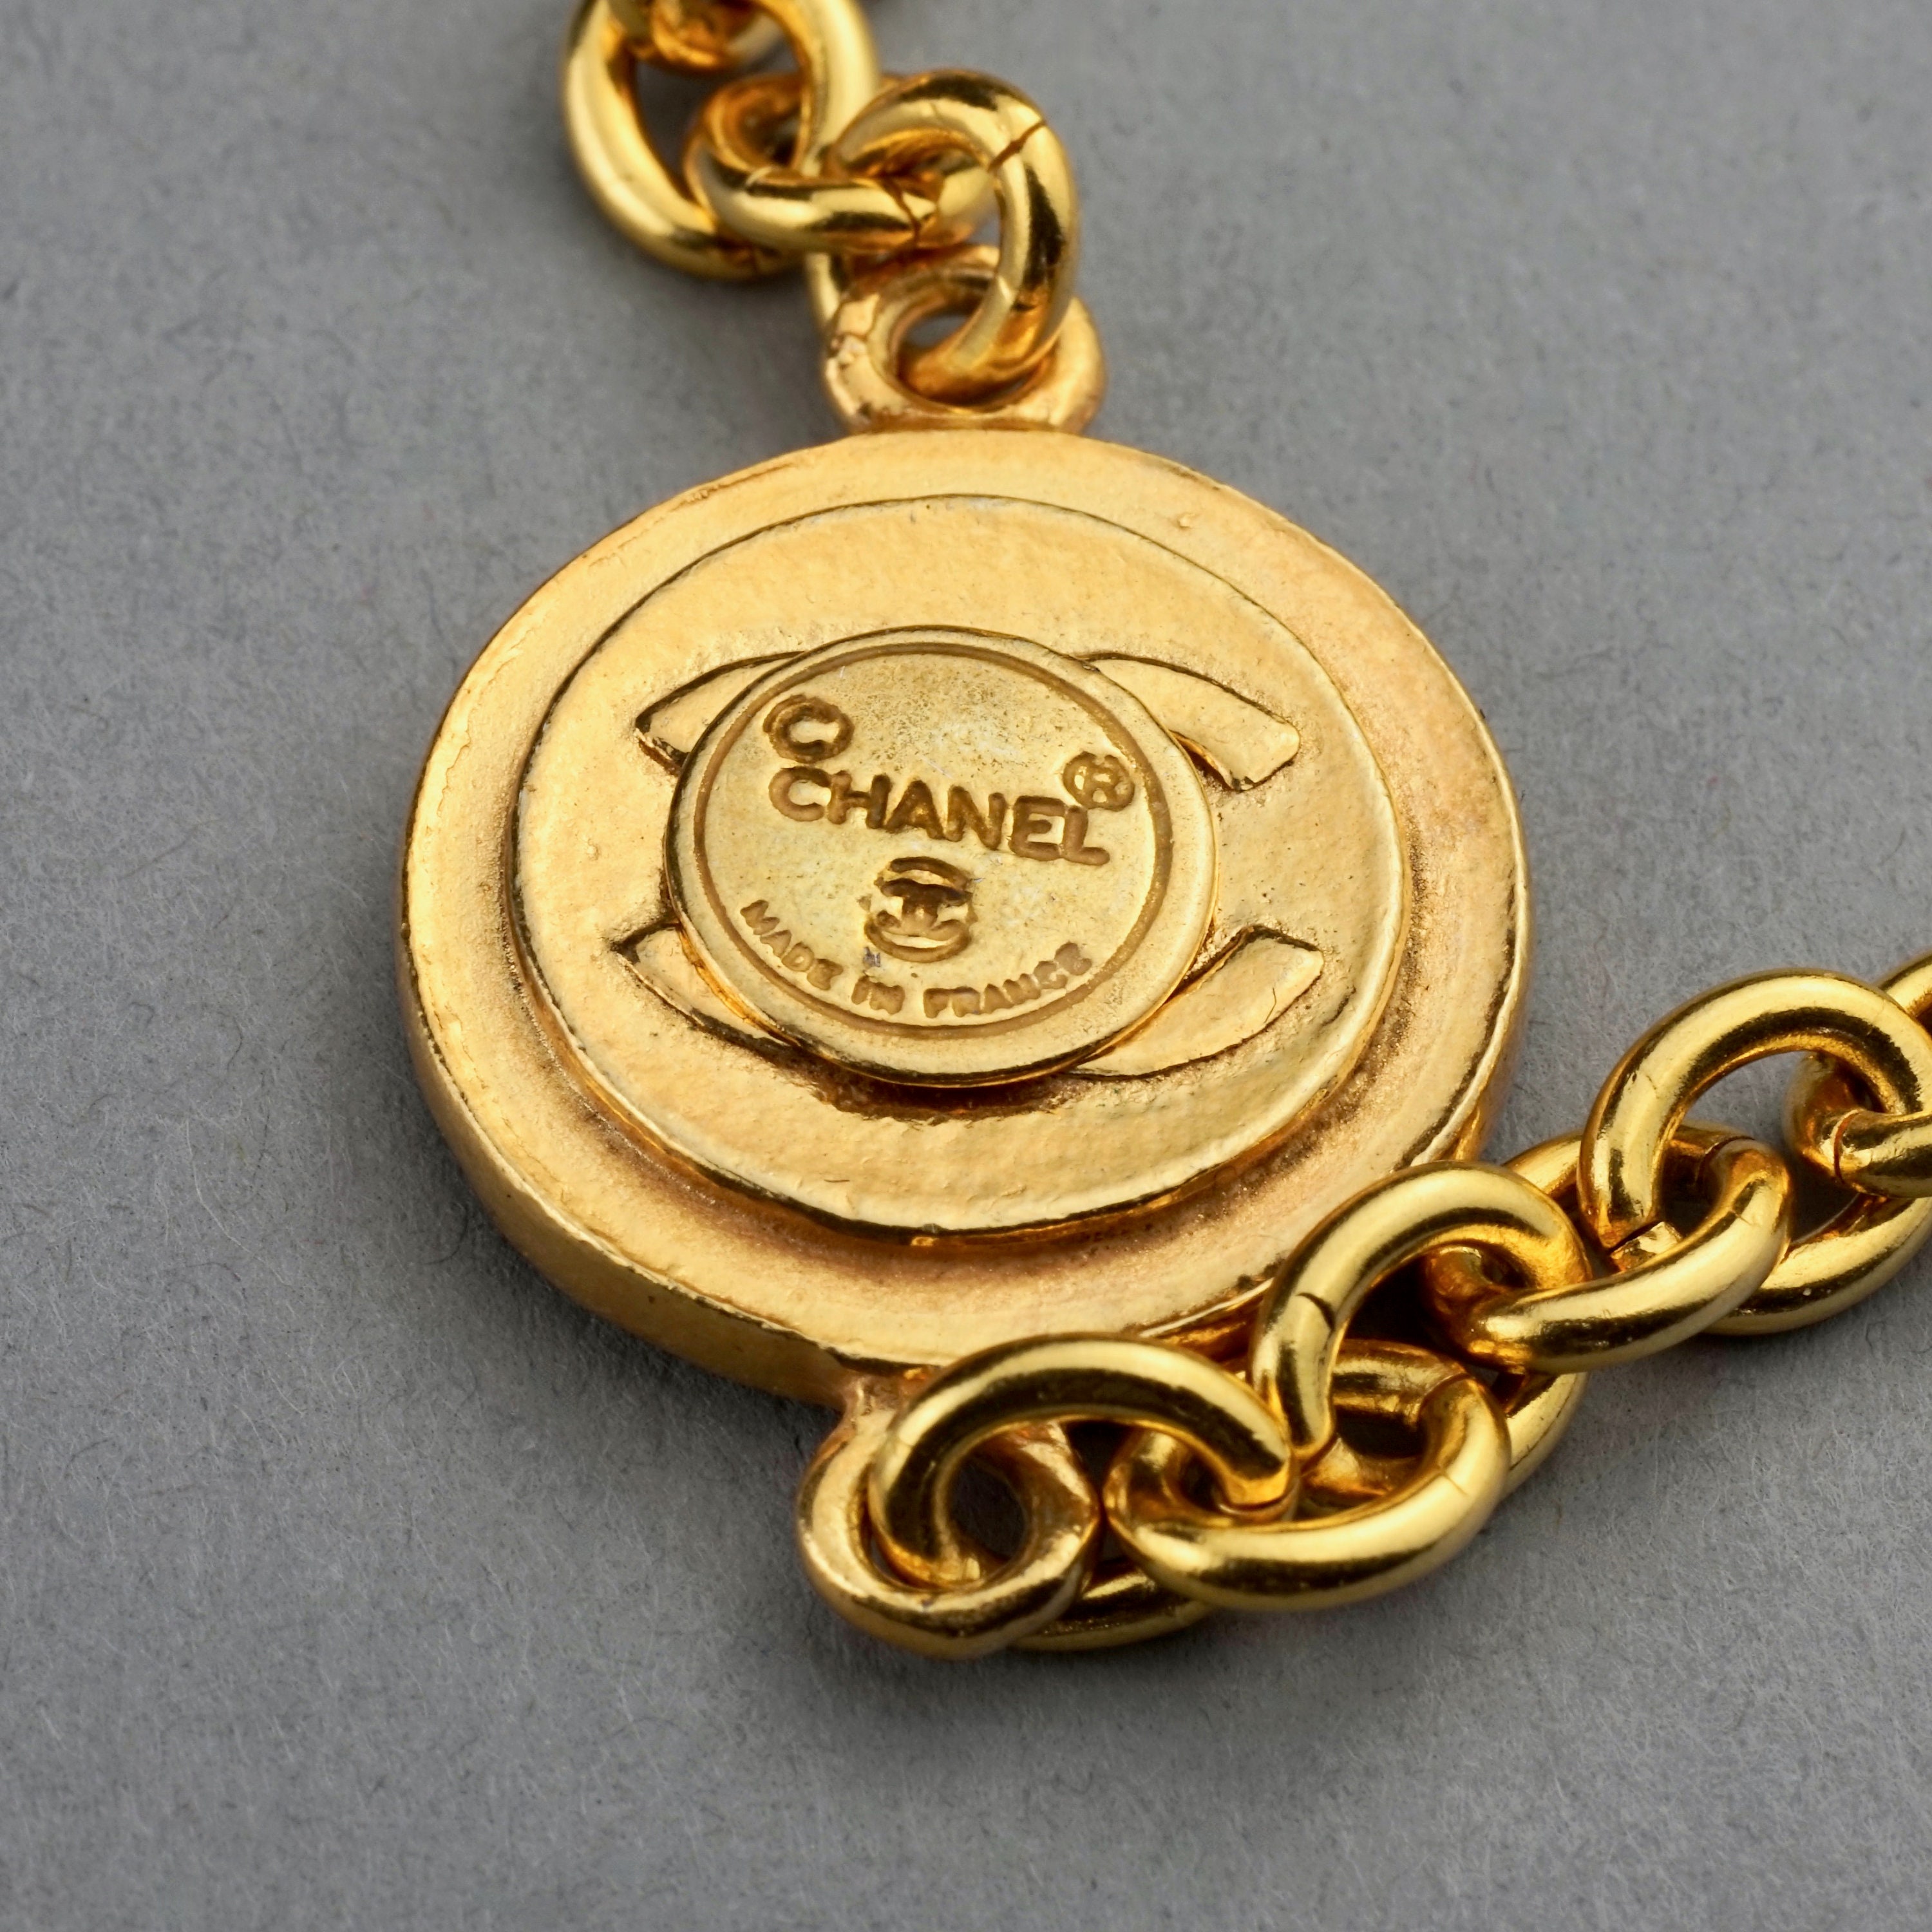 Lot - Vintage Chanel gold tone mirror pendant charm necklace with